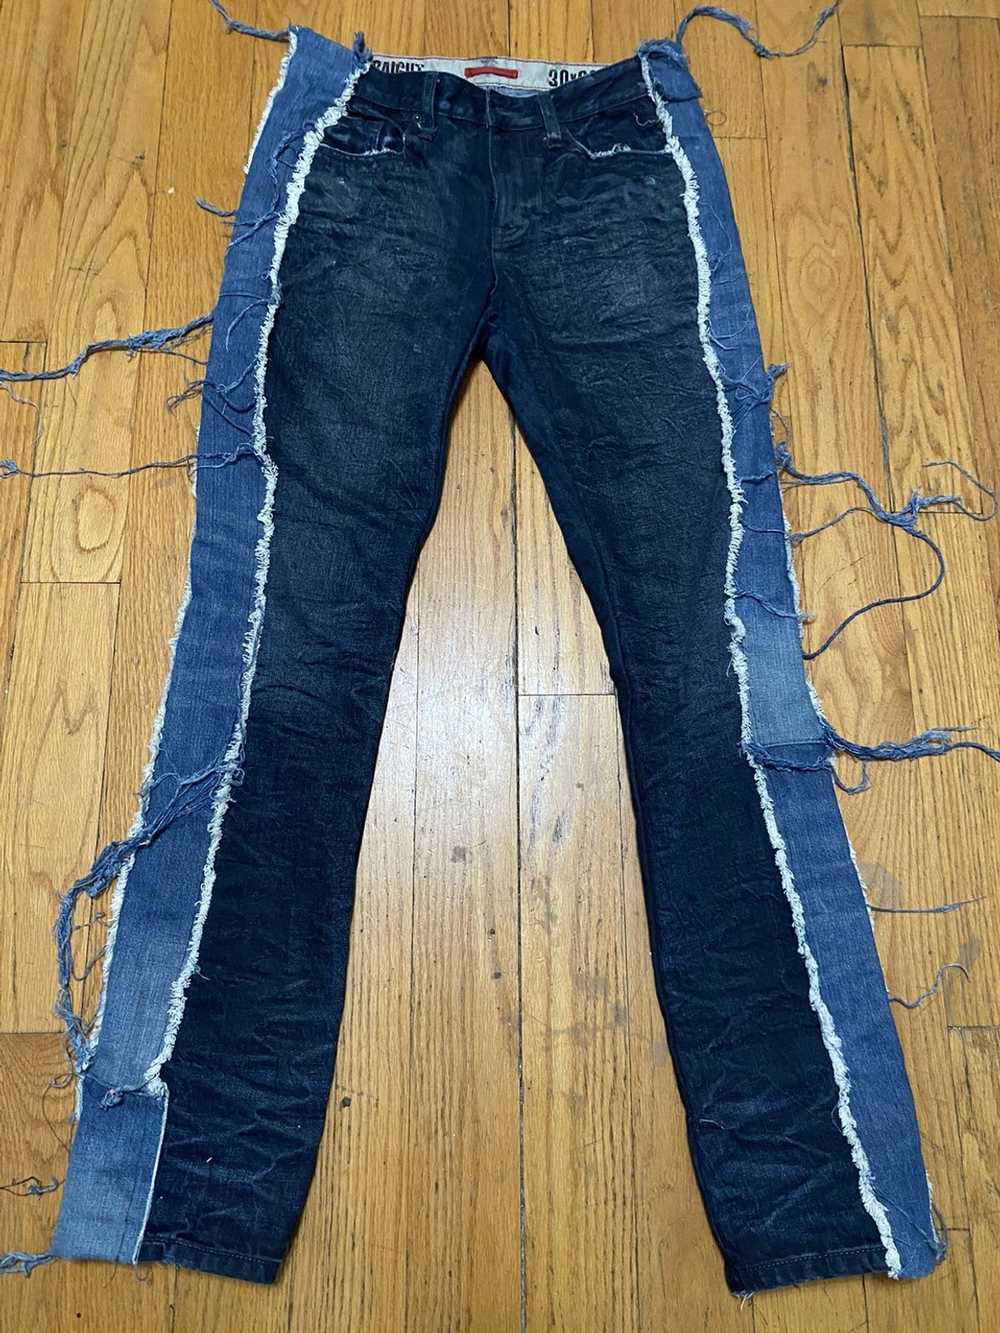 Japanese Brand Distress side patch jeans - image 1